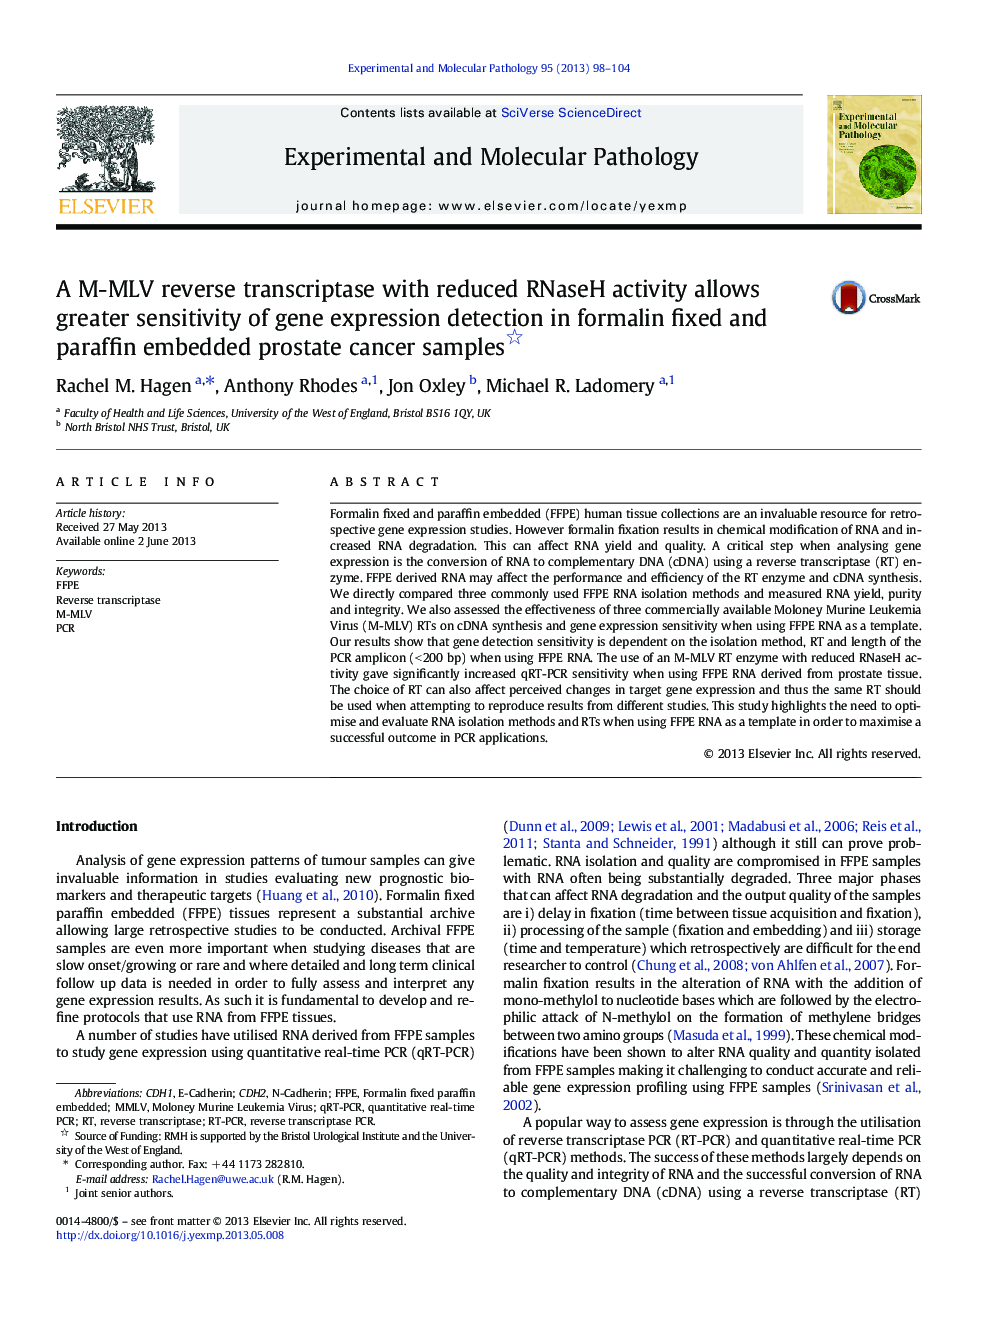 A M-MLV reverse transcriptase with reduced RNaseH activity allows greater sensitivity of gene expression detection in formalin fixed and paraffin embedded prostate cancer samples 